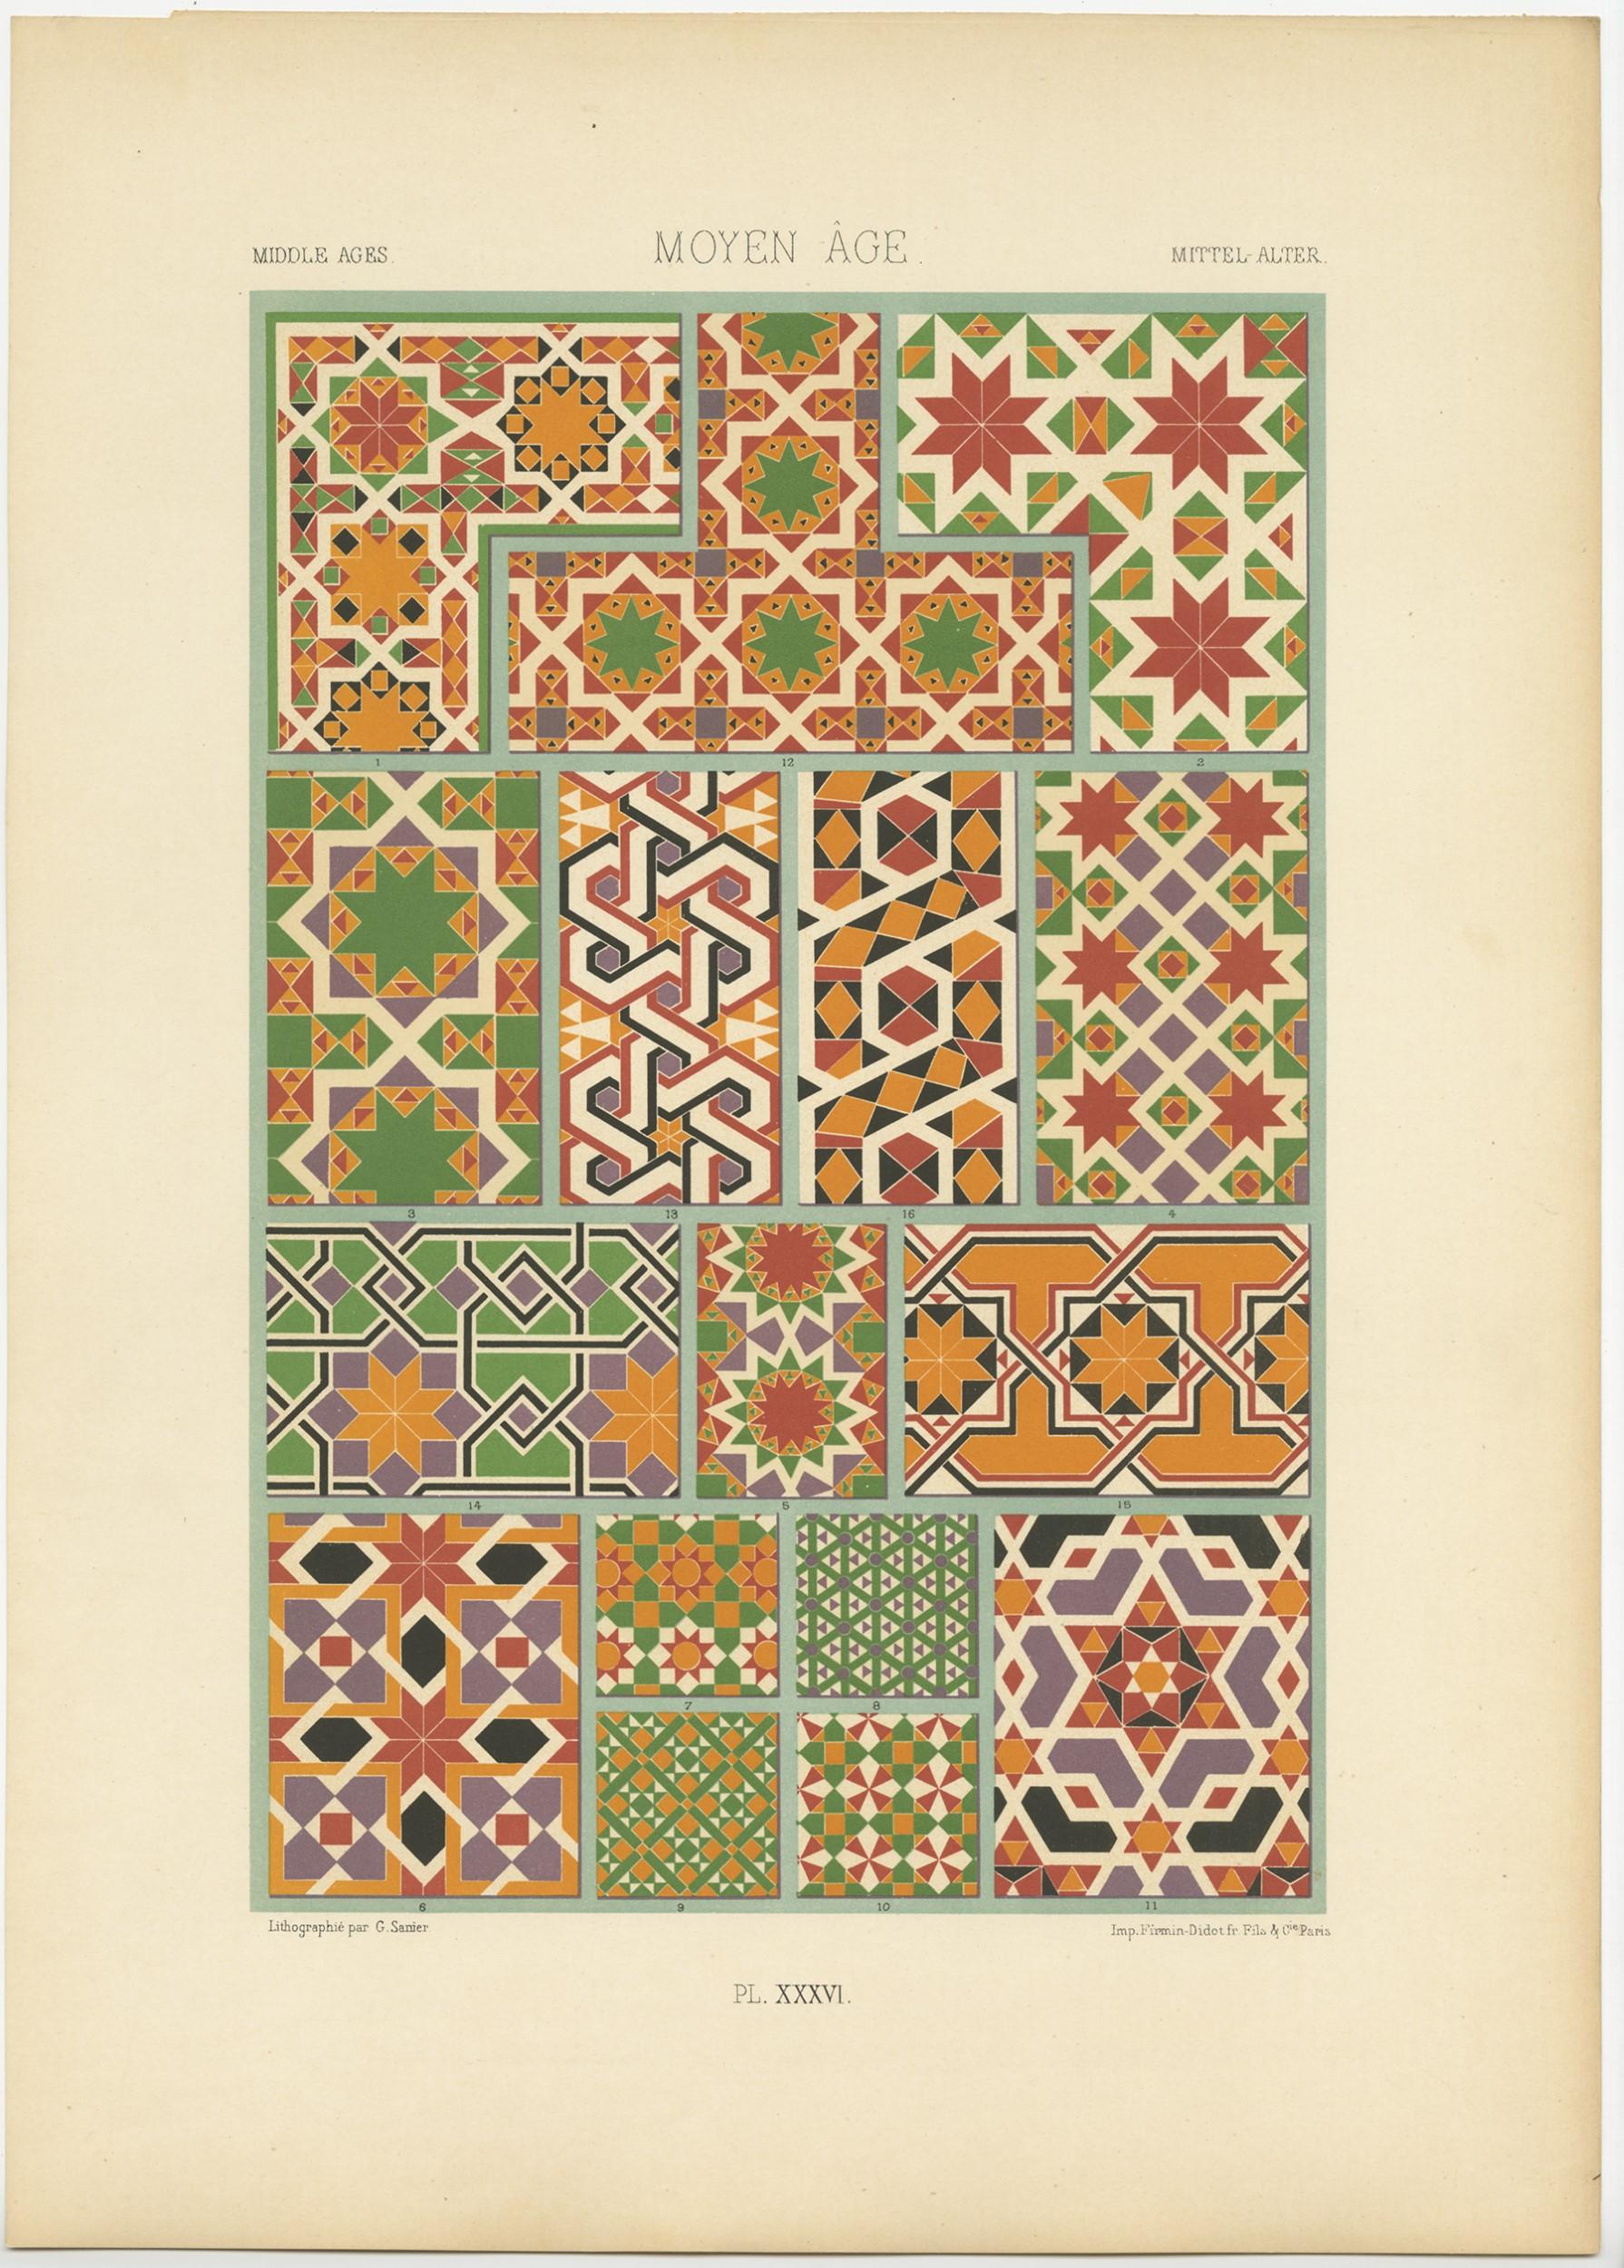 Antique print titled 'Middles Ages - Moyen Âges - Mittle Alter'. Chromolithograph of Middles Ages ornaments and decorative arts. This print originates from 'l'Ornement Polychrome' by Auguste Racinet. Published circa 1890.